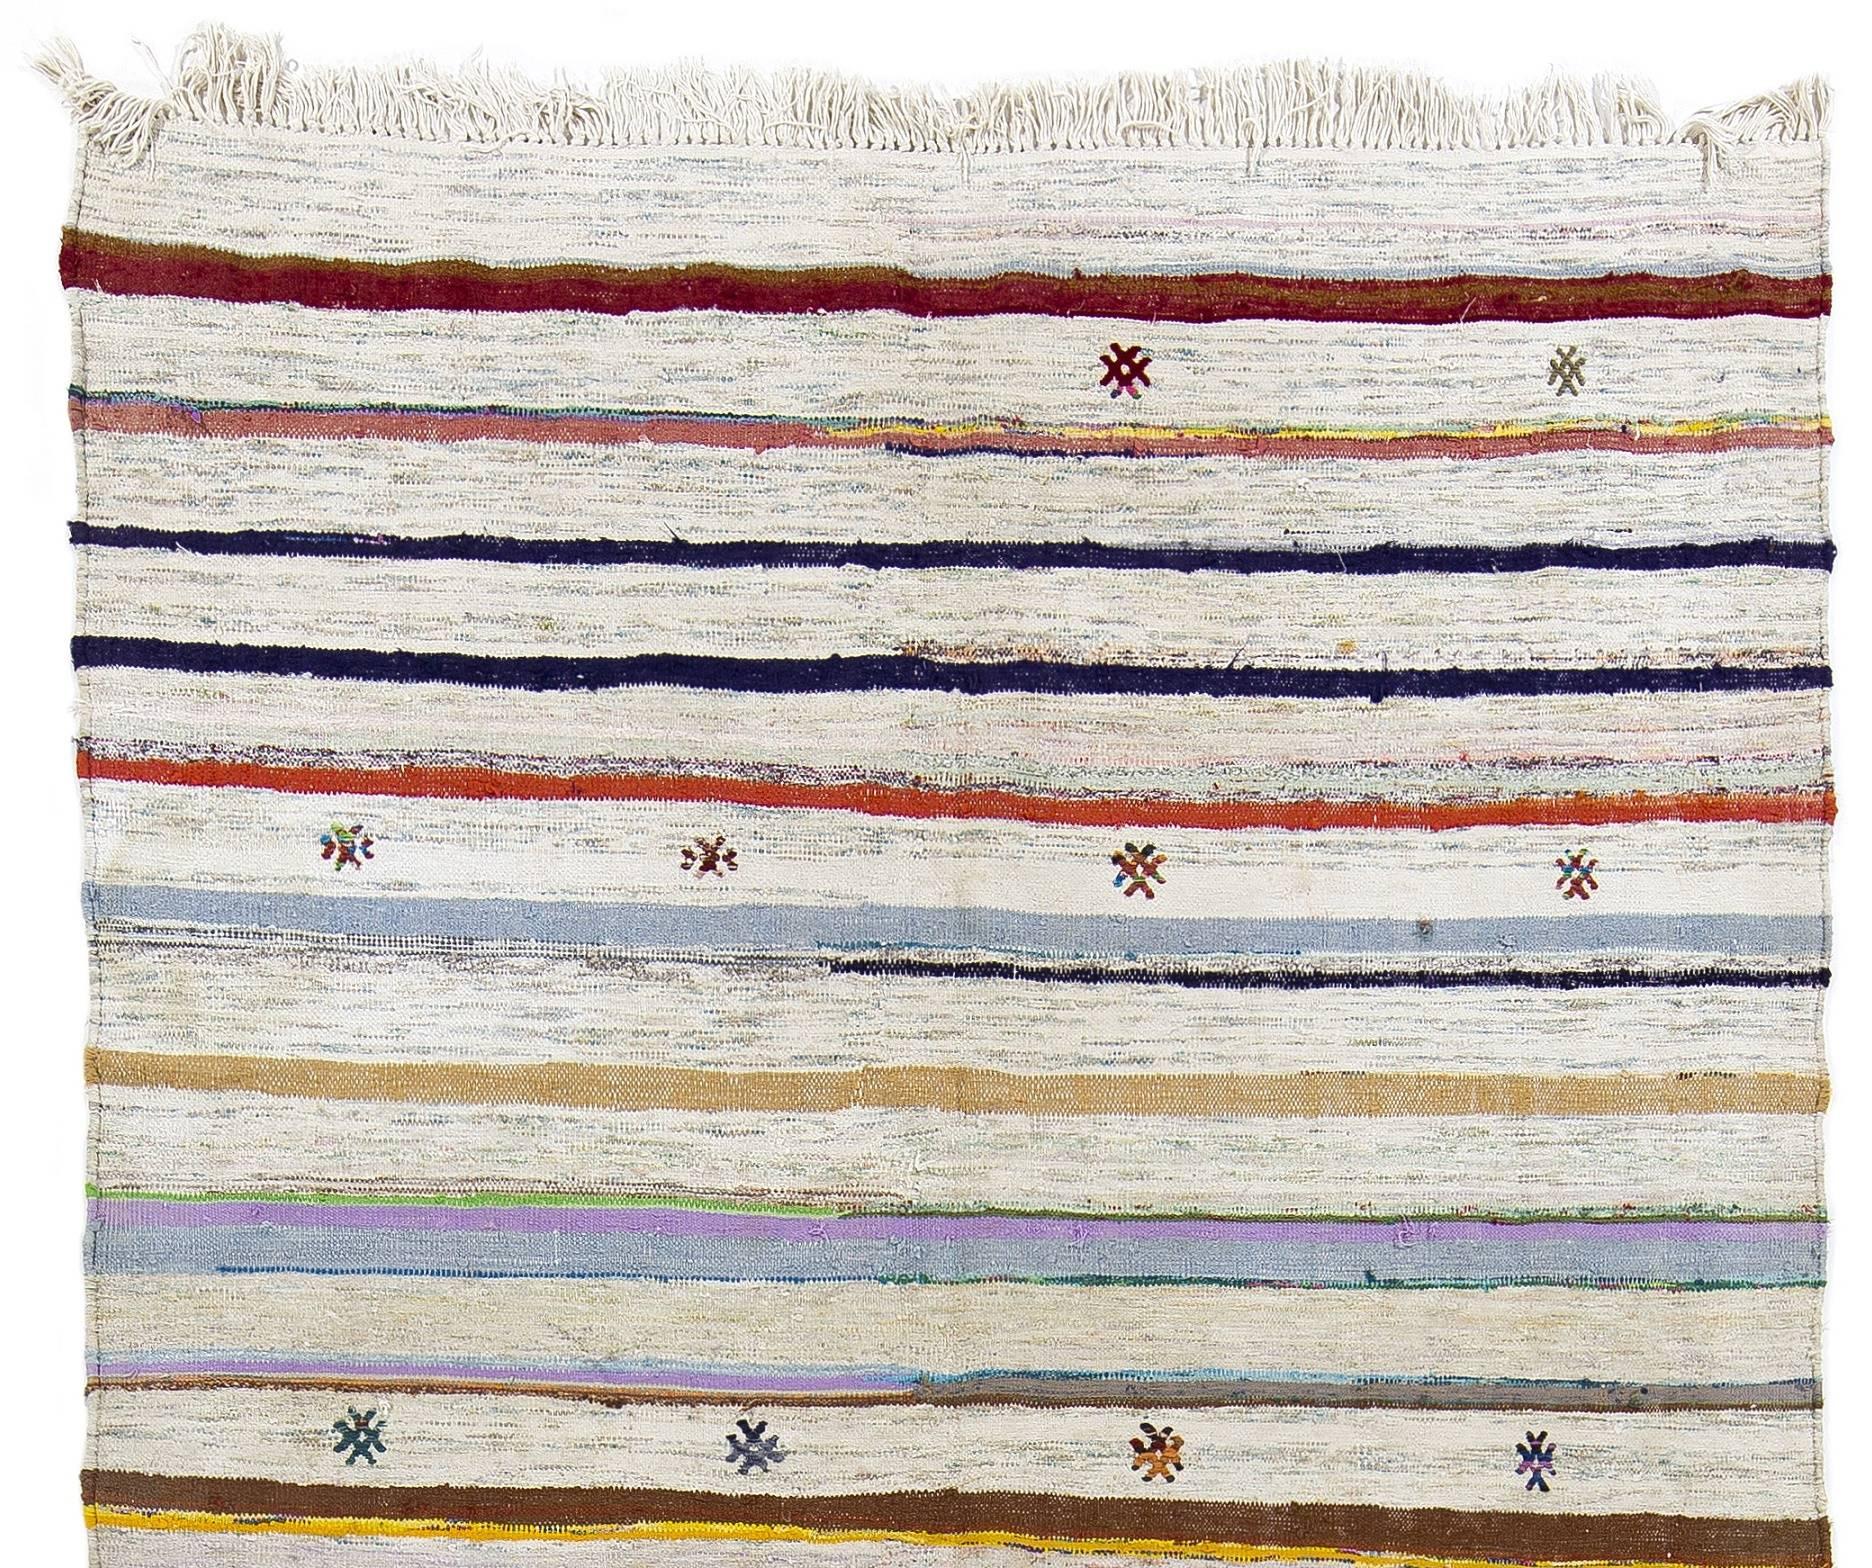 Hand-Woven Cotton Anatolian Kilim Runner with Colorful Stripes